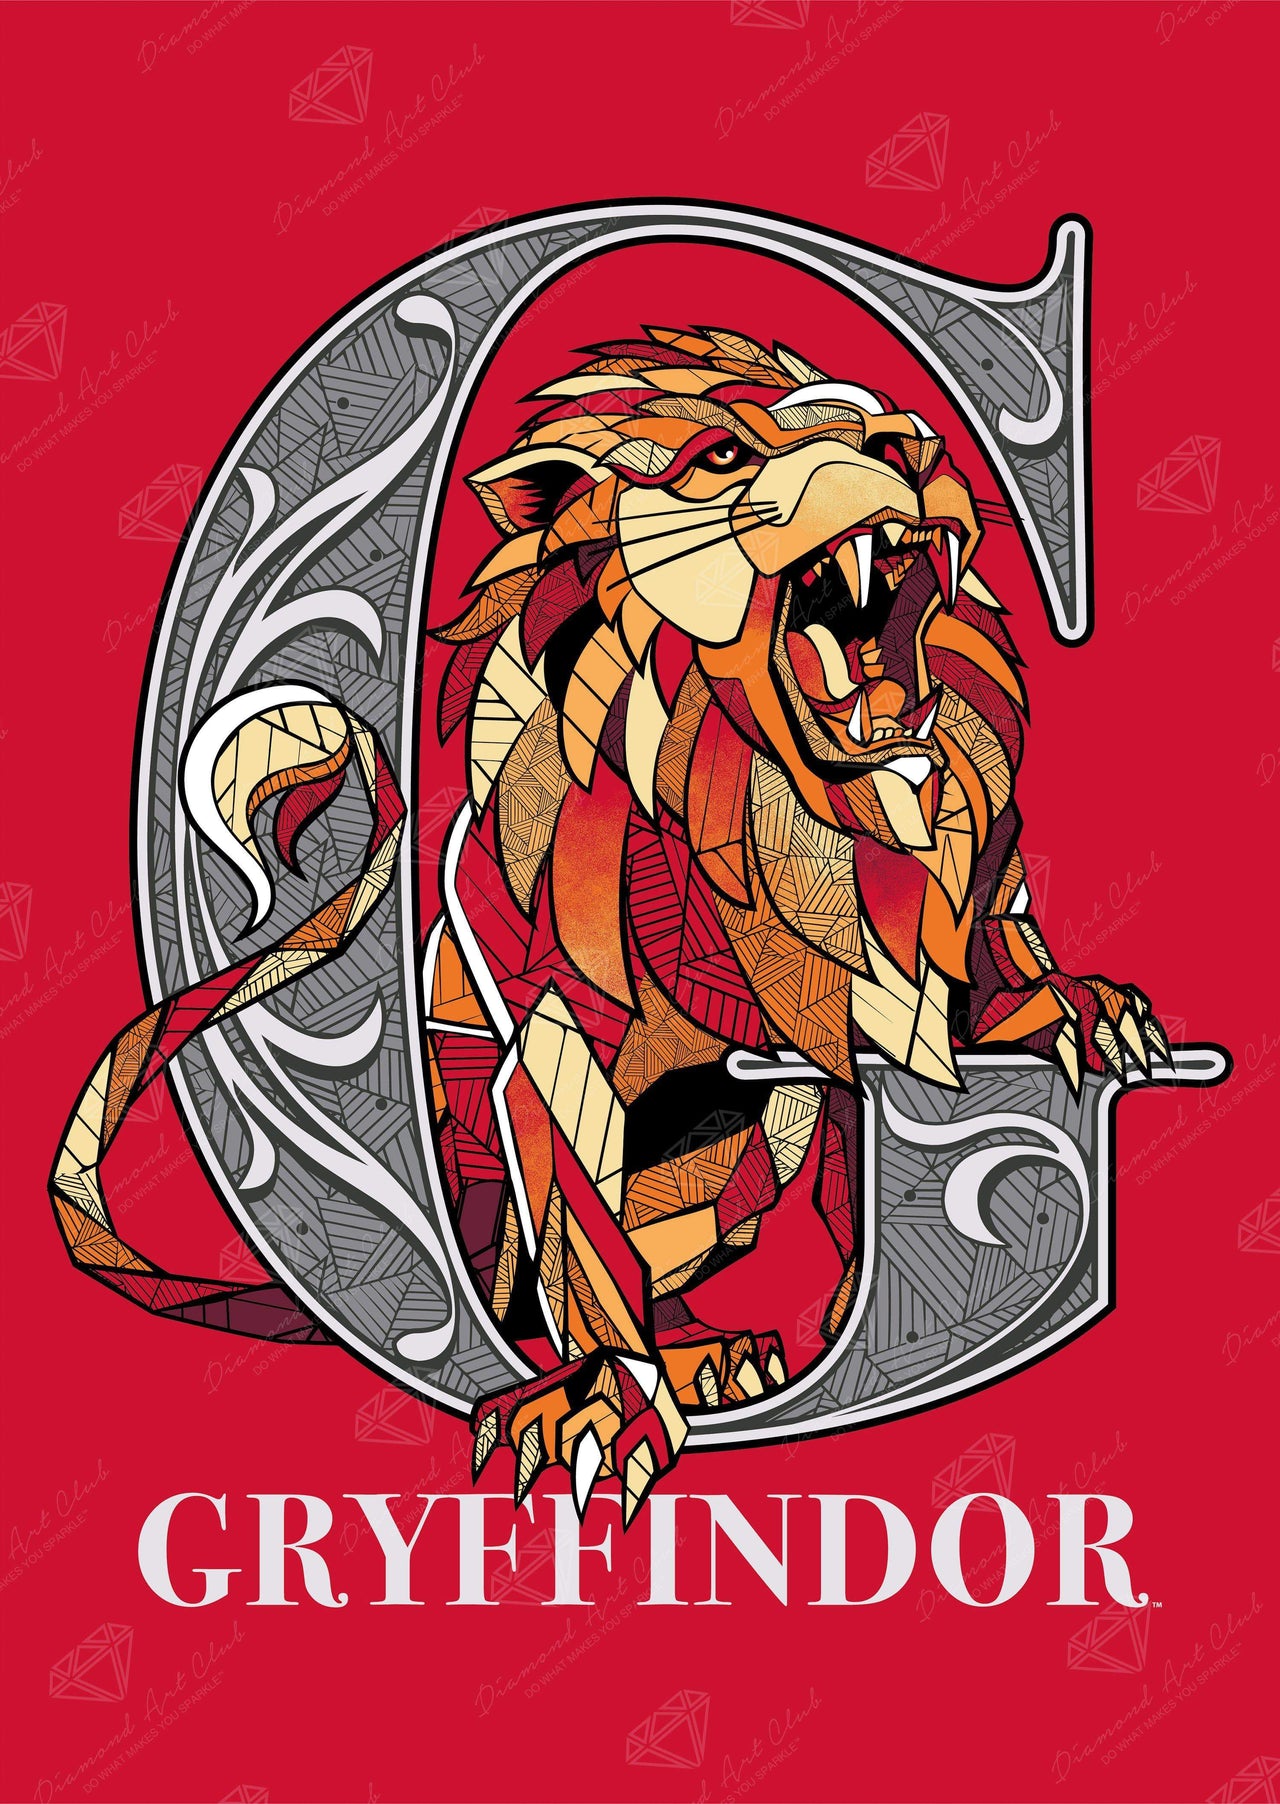 Diamond Painting Gryffindor Crest - Stand Together 17" x 24″ (43cm x 61cm) / Square With 14 Colors Including 3 ABs / 41,211